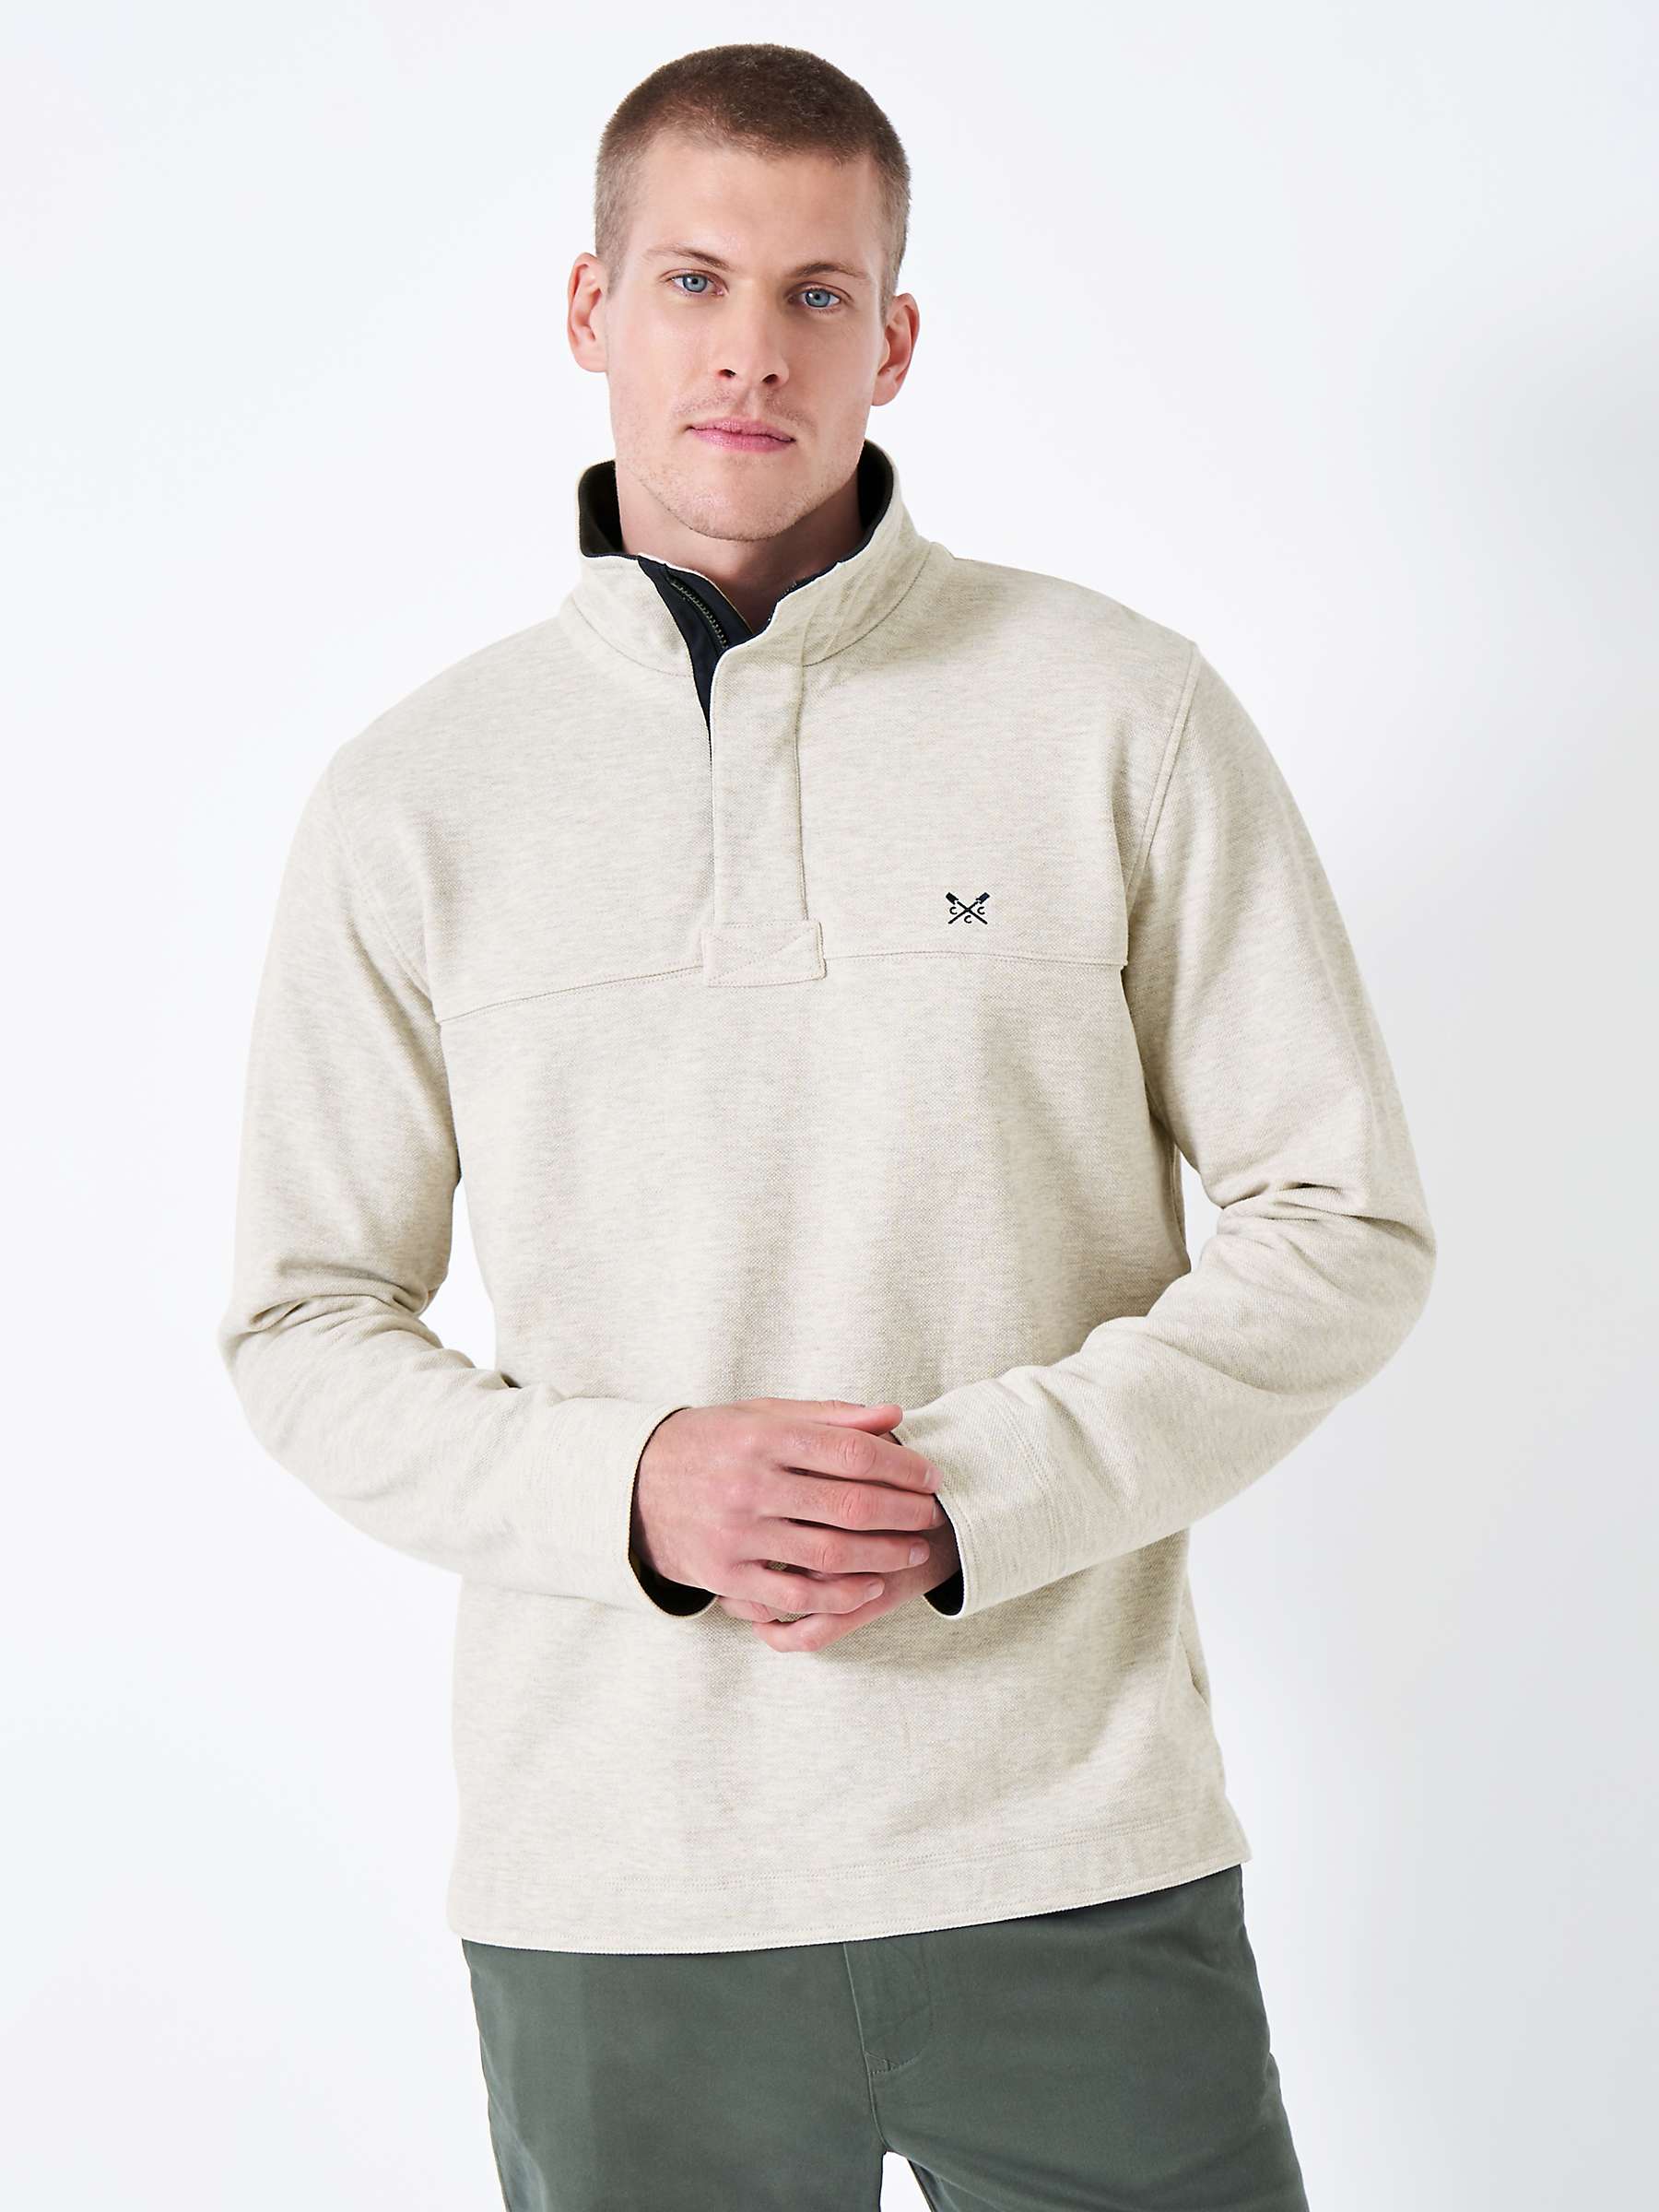 Buy Crew Clothing Padstow Pique Jumper Online at johnlewis.com